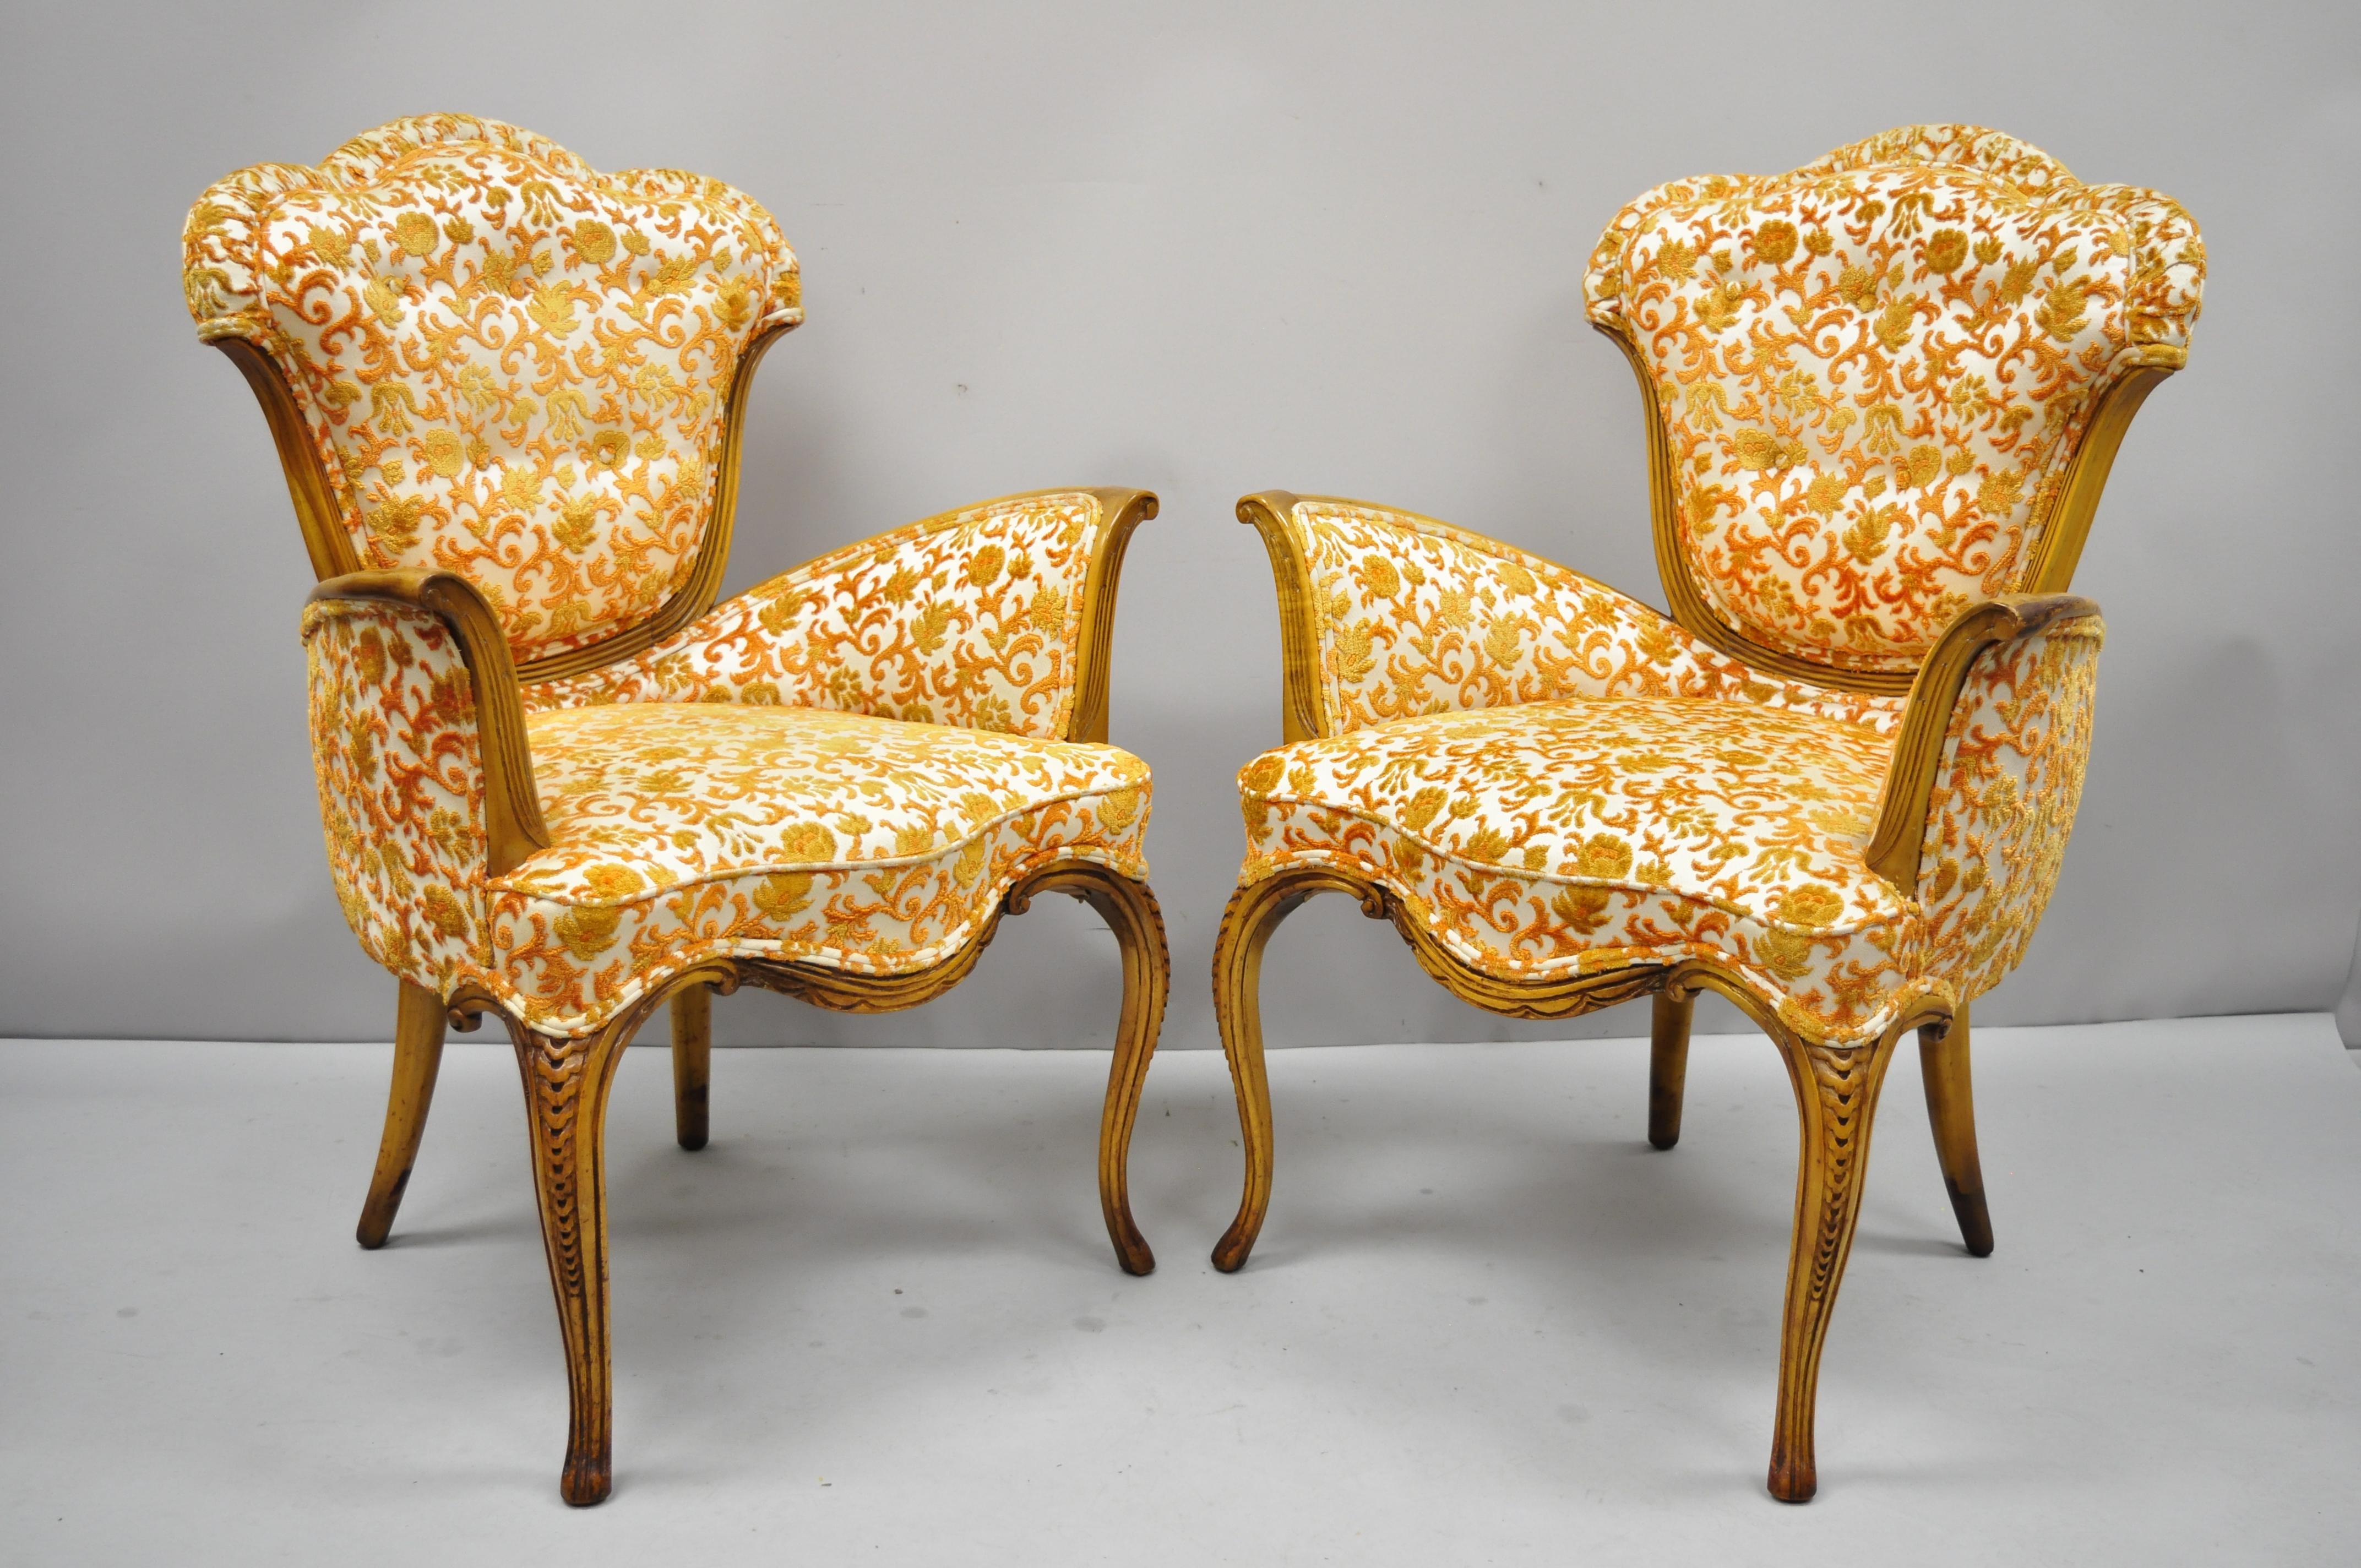 Pair of vintage Hollywood Regency French style orange fabric fireside lounge armchairs. Item features ornate orange floral print fabric, thick tufted backs, solid wood frame, nicely carved details, tapered legs, very nice vintage item, great style